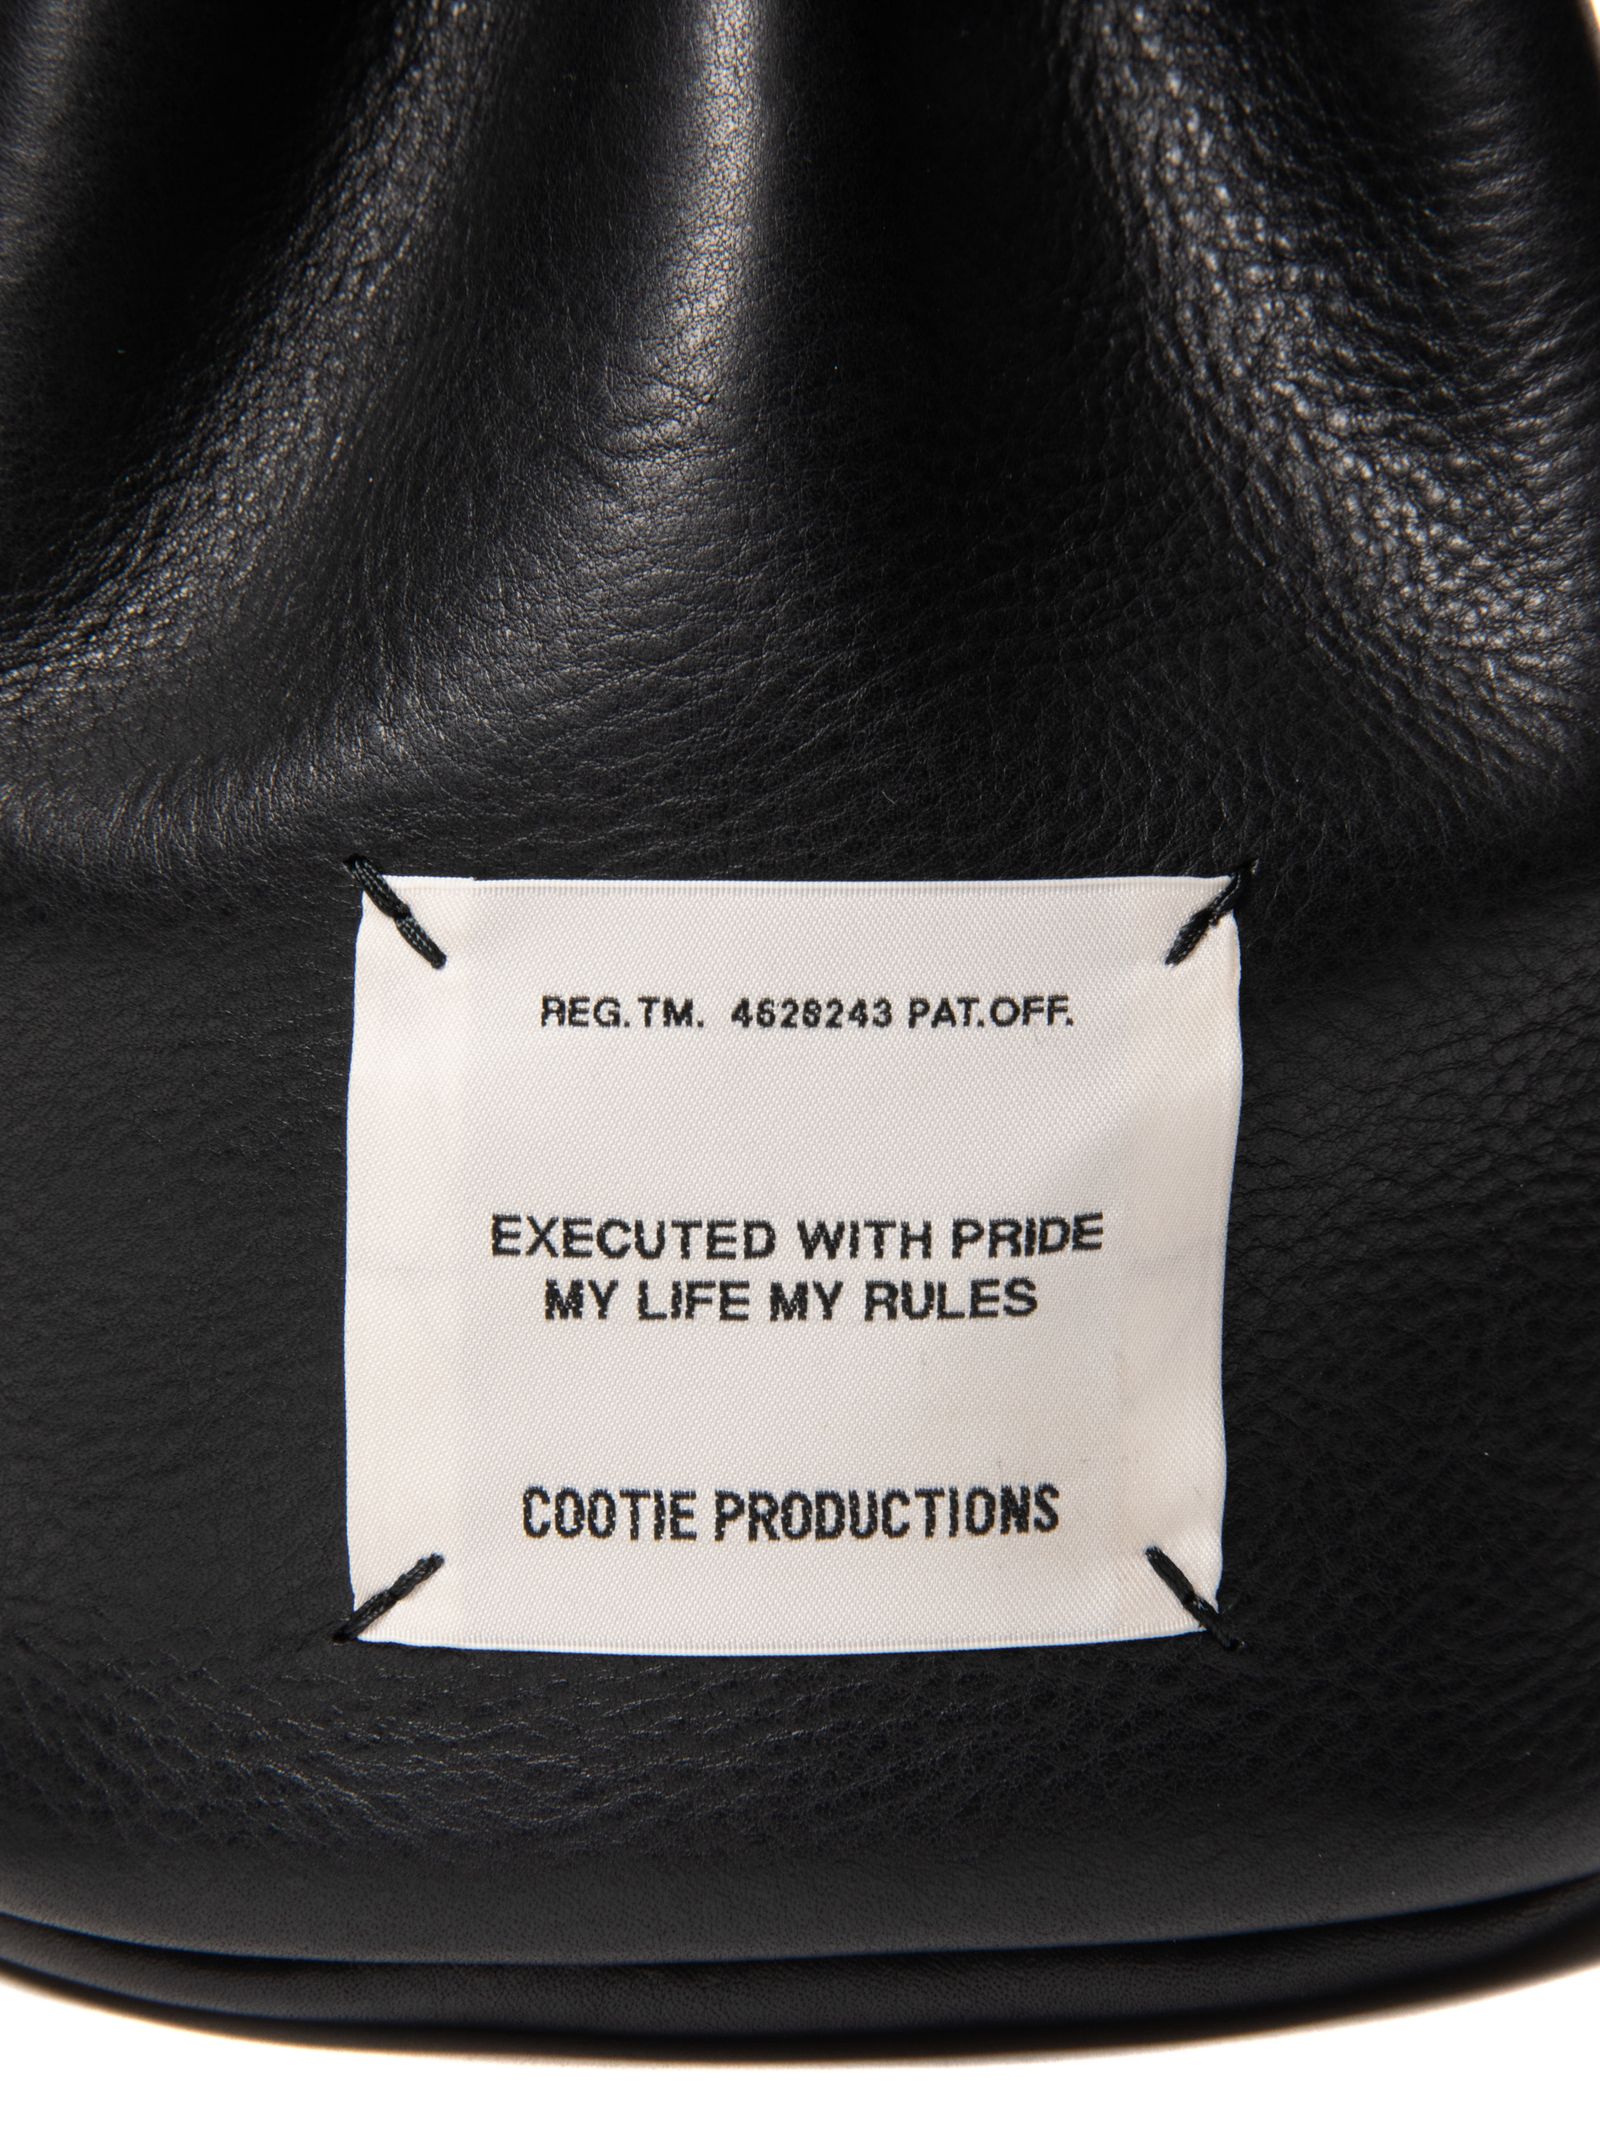 COOTIE PRODUCTIONS - Leather Bucket Bag (BLACK) / レザー 巾着 